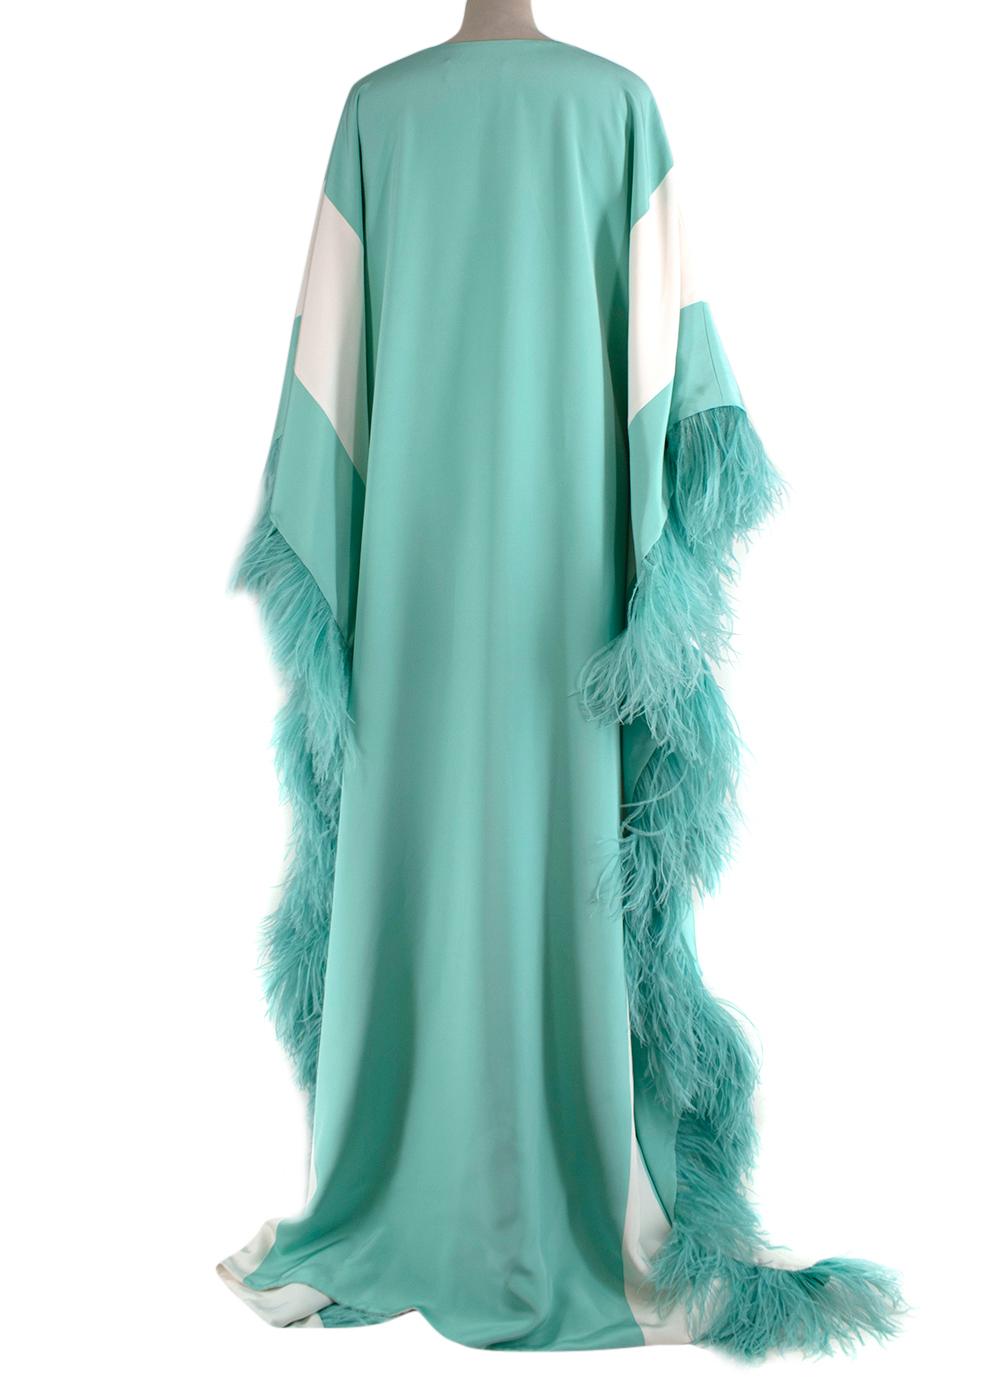 Christian Siriano V Neck Caftan with Feathers

- Oversized V neck caftan with large draped sleeves in a bright turquoise hue 
- Diagonal white stripes along the sides and arms 
- Ostrich feather trimming along the side seams and cuffs  
- Silk crepe